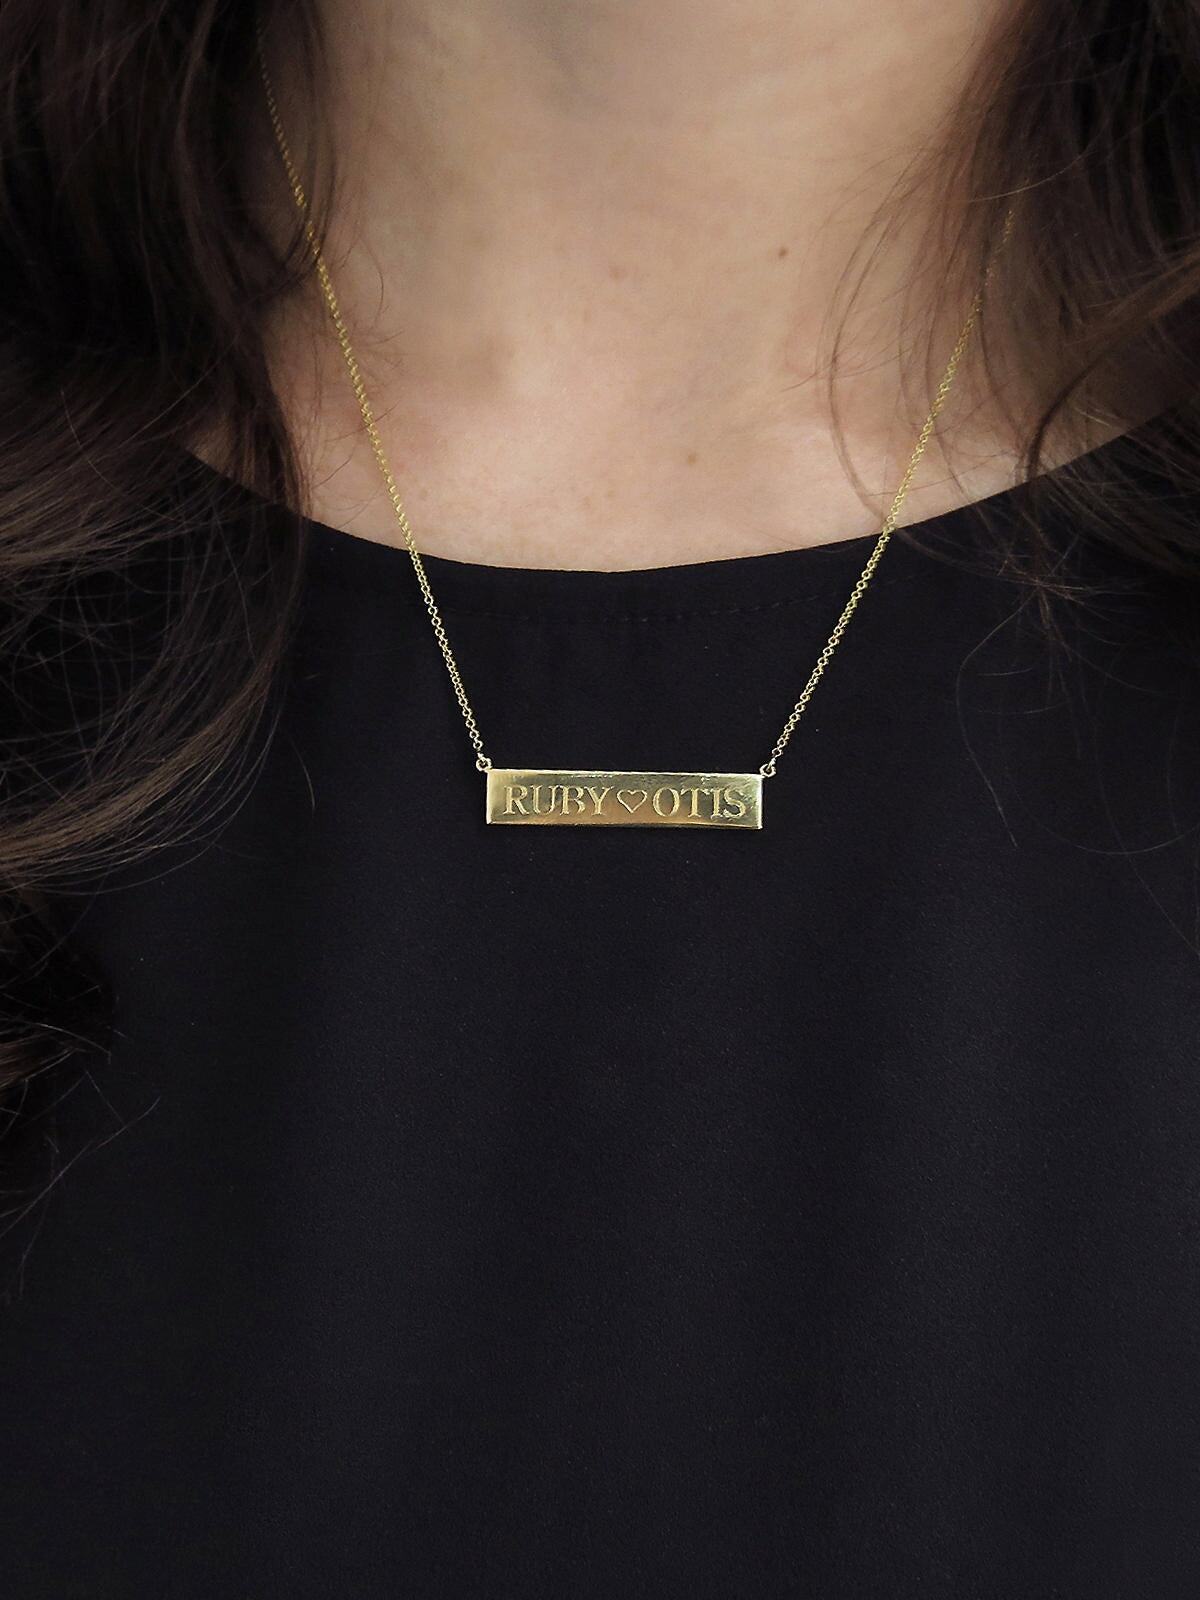 1 Side Engraving, 18-in. Personalized Yellow Gold Nameplate Necklace